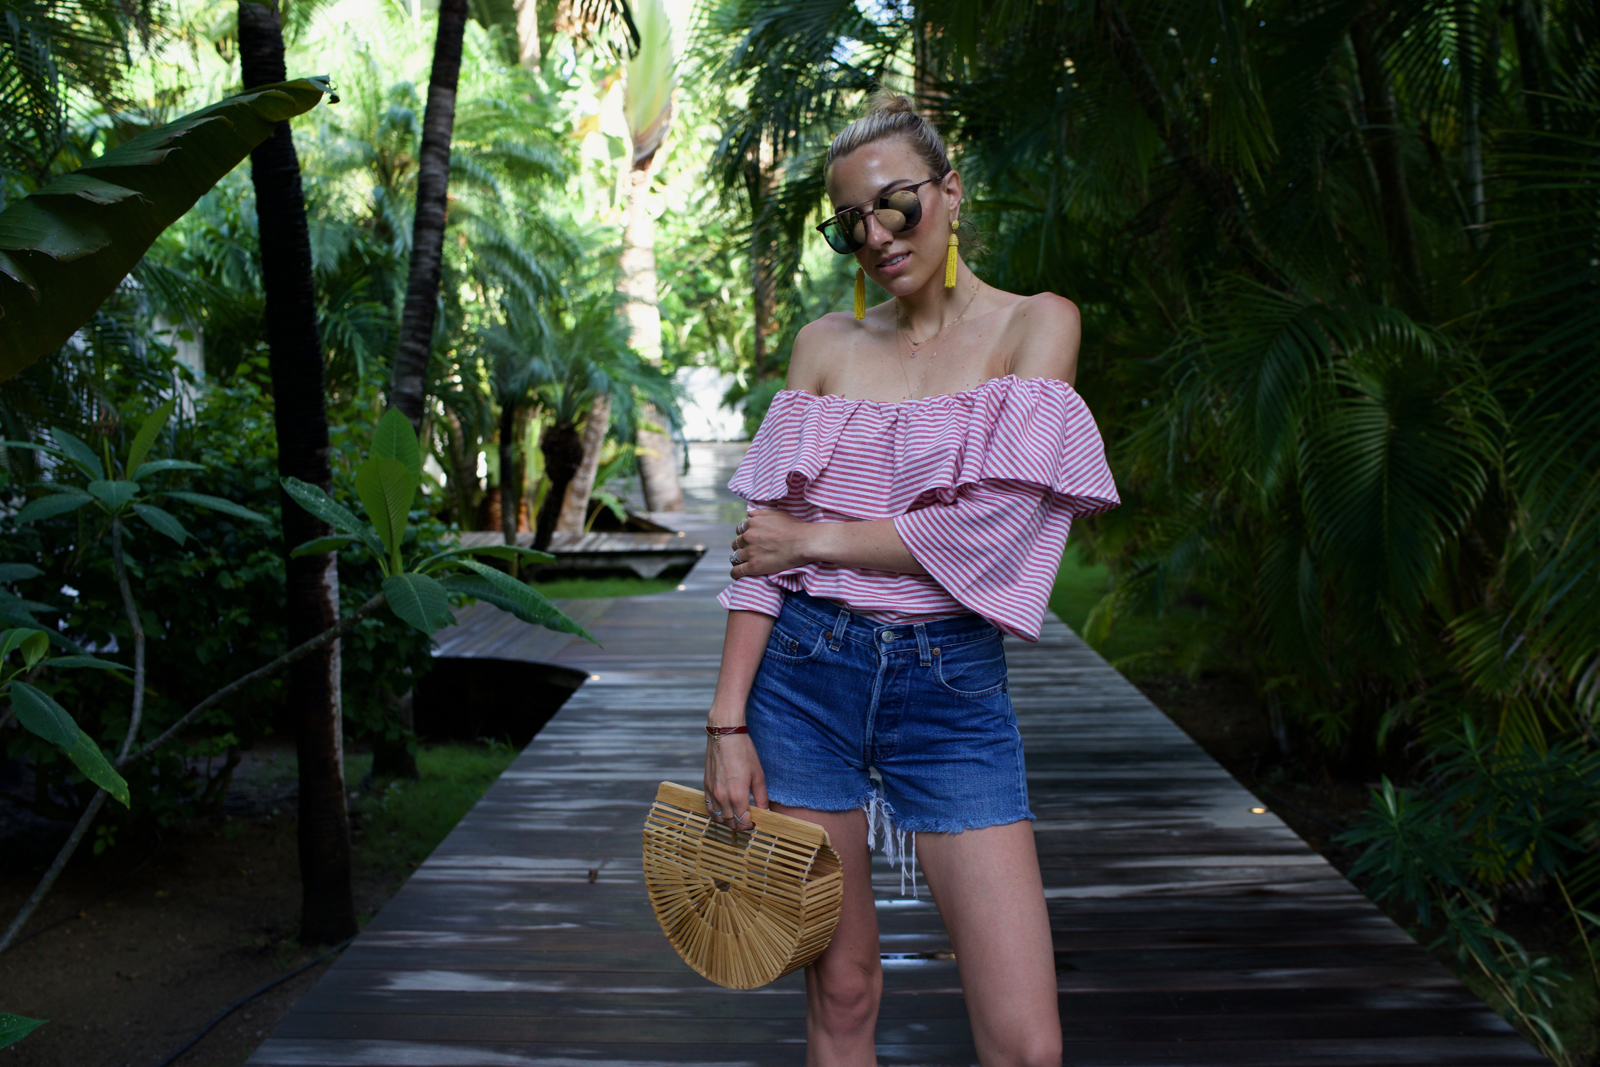 How To Look Chic This Summer in Classic Stripes & Stand-out Accessories | St. Barths